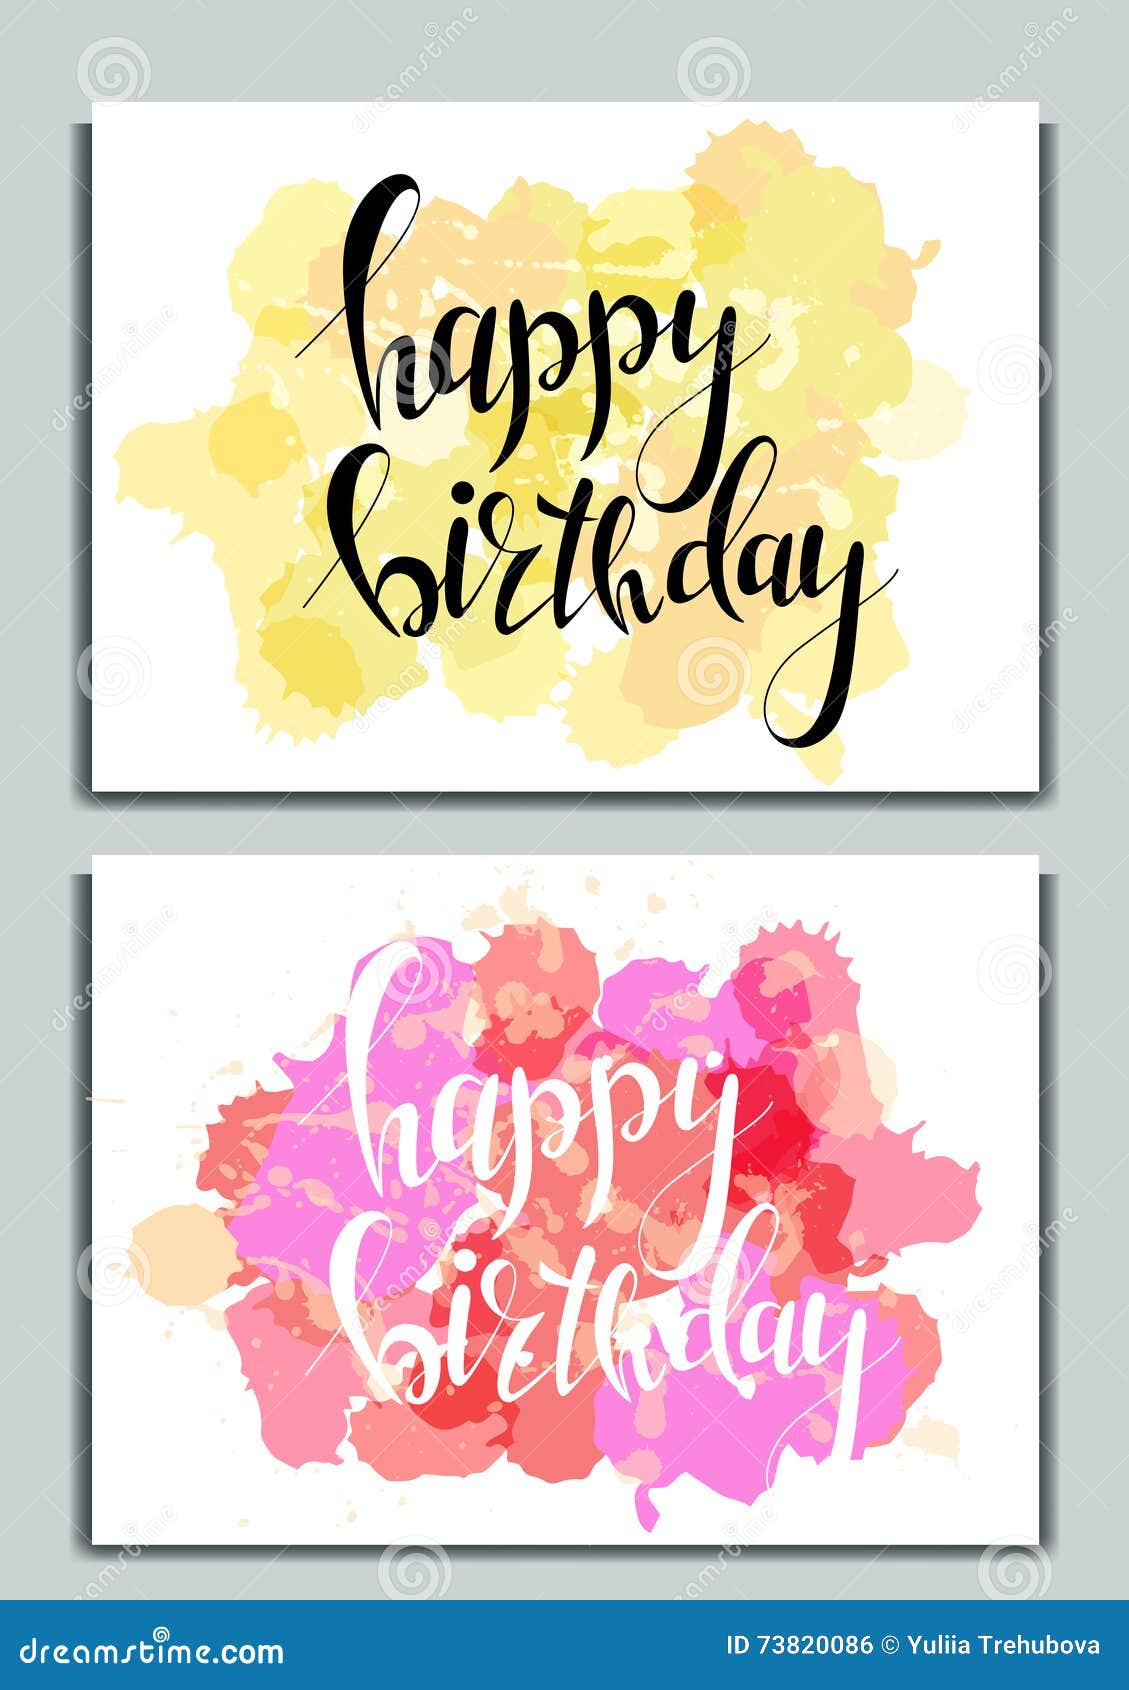 Hand Drawn Design. Happy Birthday Vintage Composition. Calligraphic Phrase  on Greeting Card Stock Vector - Illustration of hand, card: 73820086